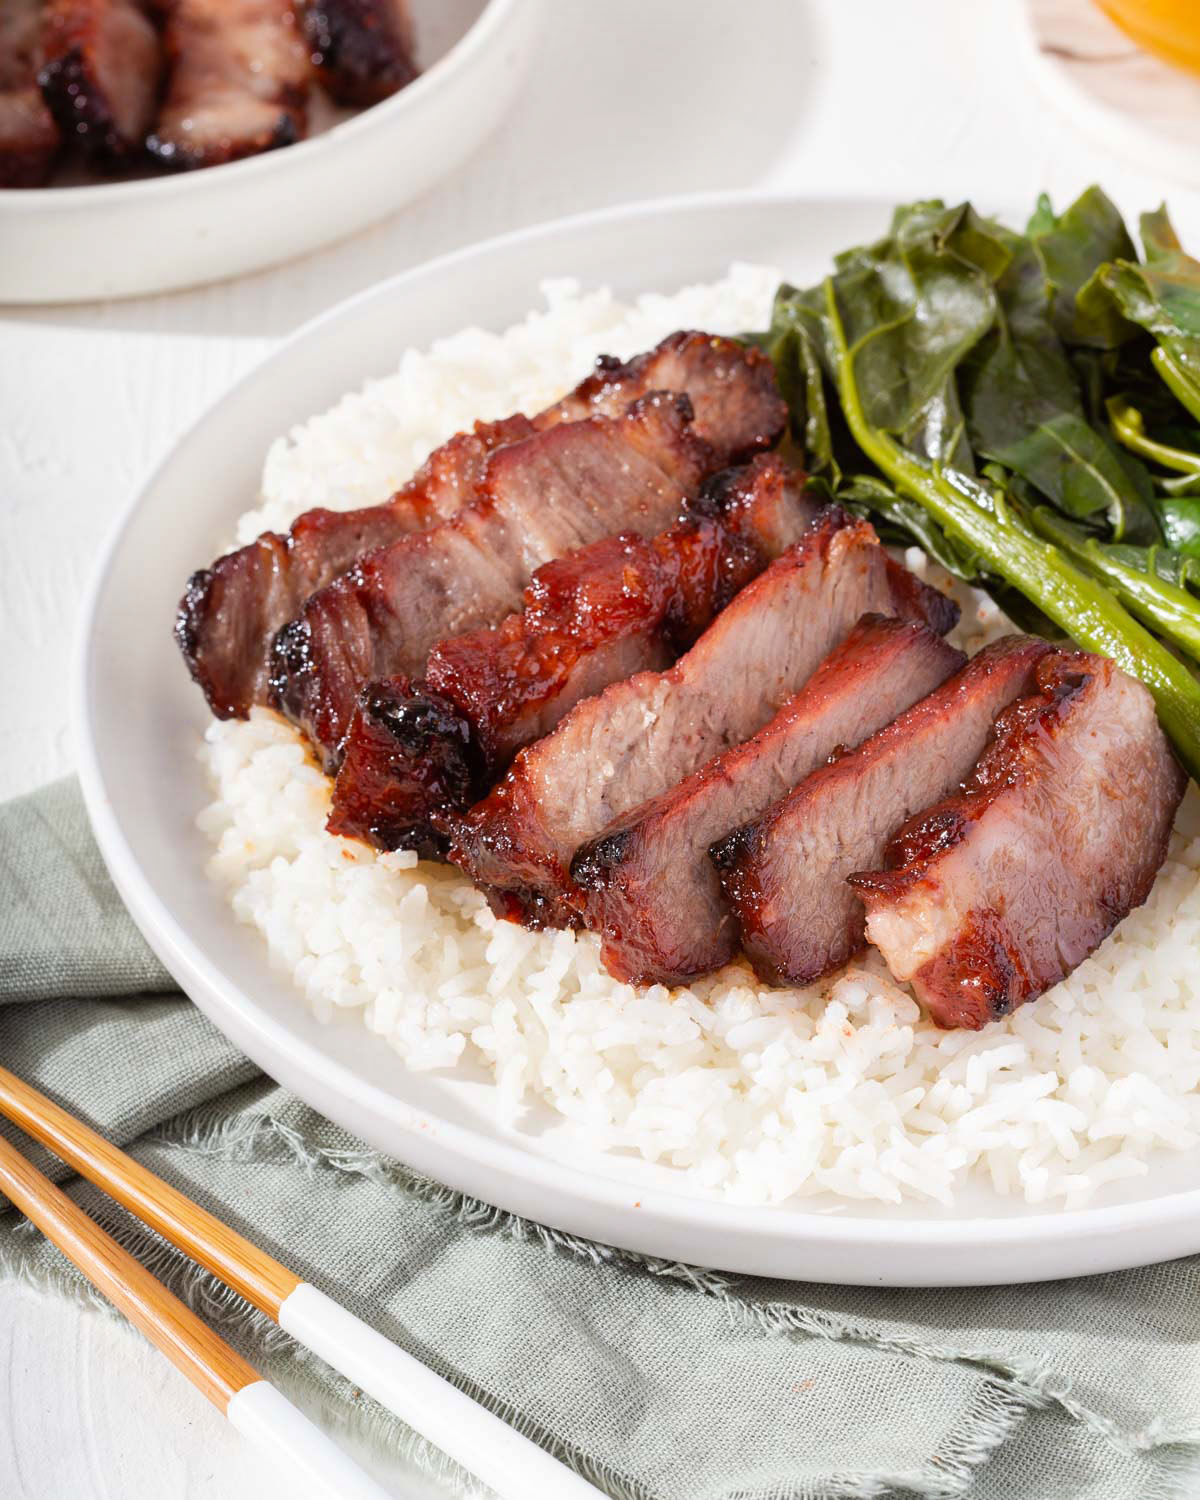 A plate of Chinese bbq pork sitting on rice with greens on the side.